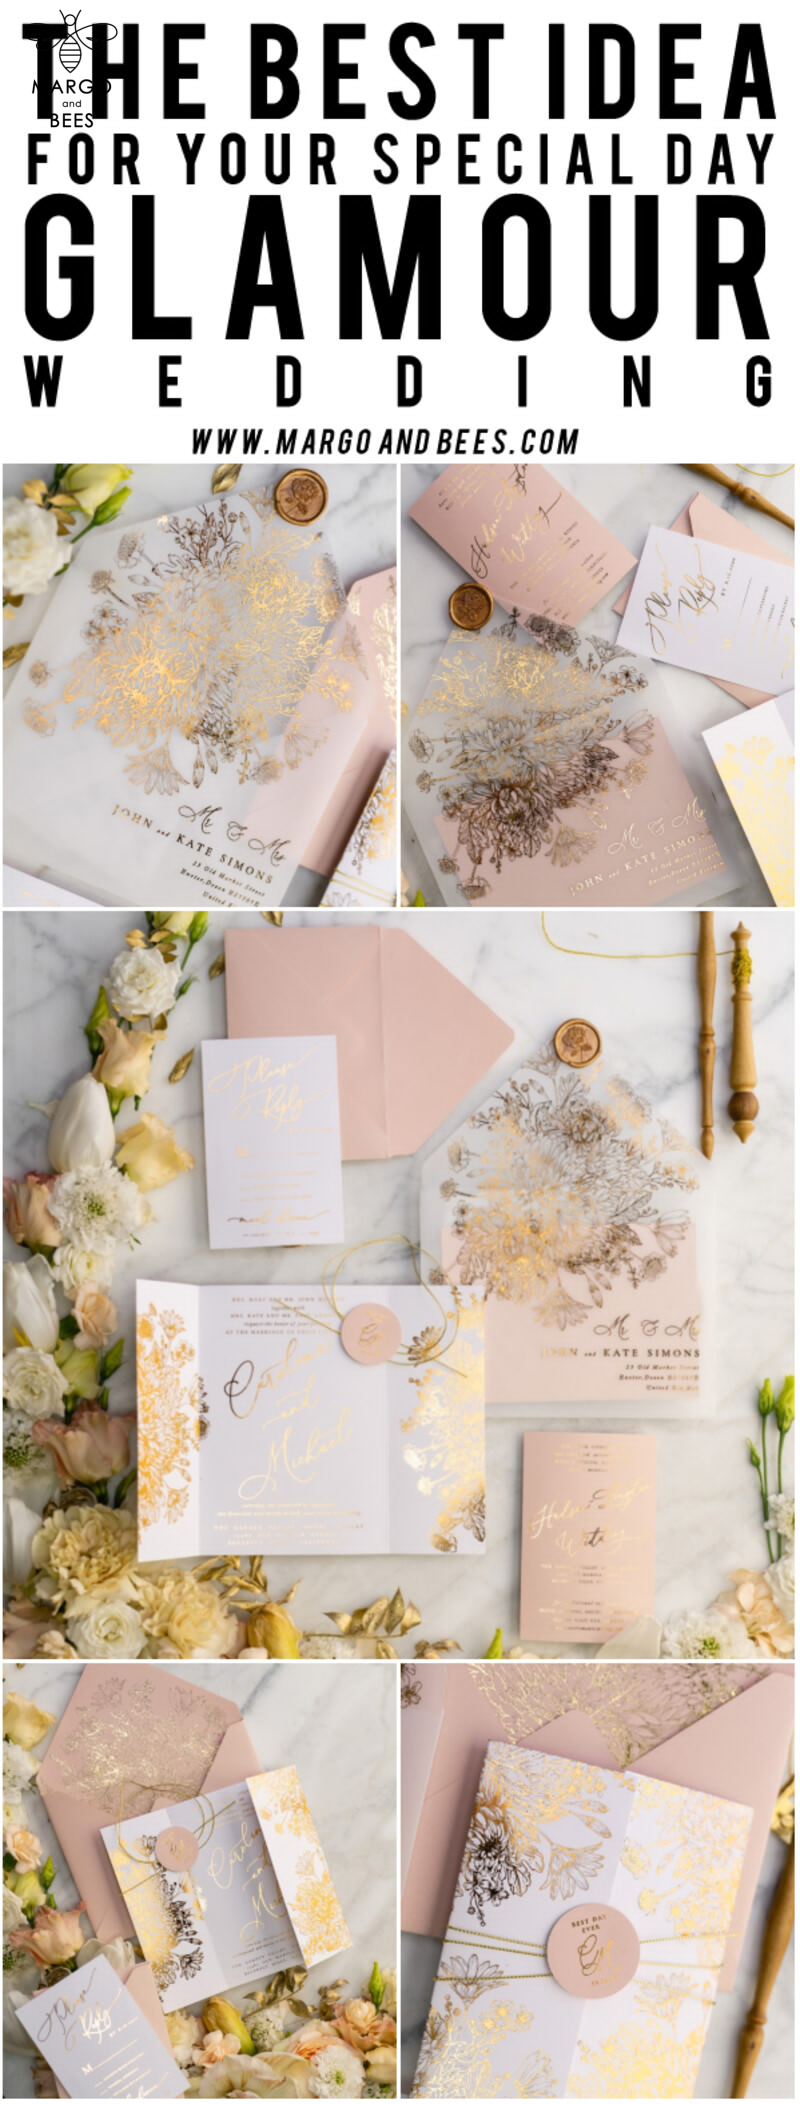 Elegant Arabic Golden Wedding Invitations with Glamour Gold Foil and Romantic Blush Pink - Exquisite Bespoke Indian Wedding Stationery-42